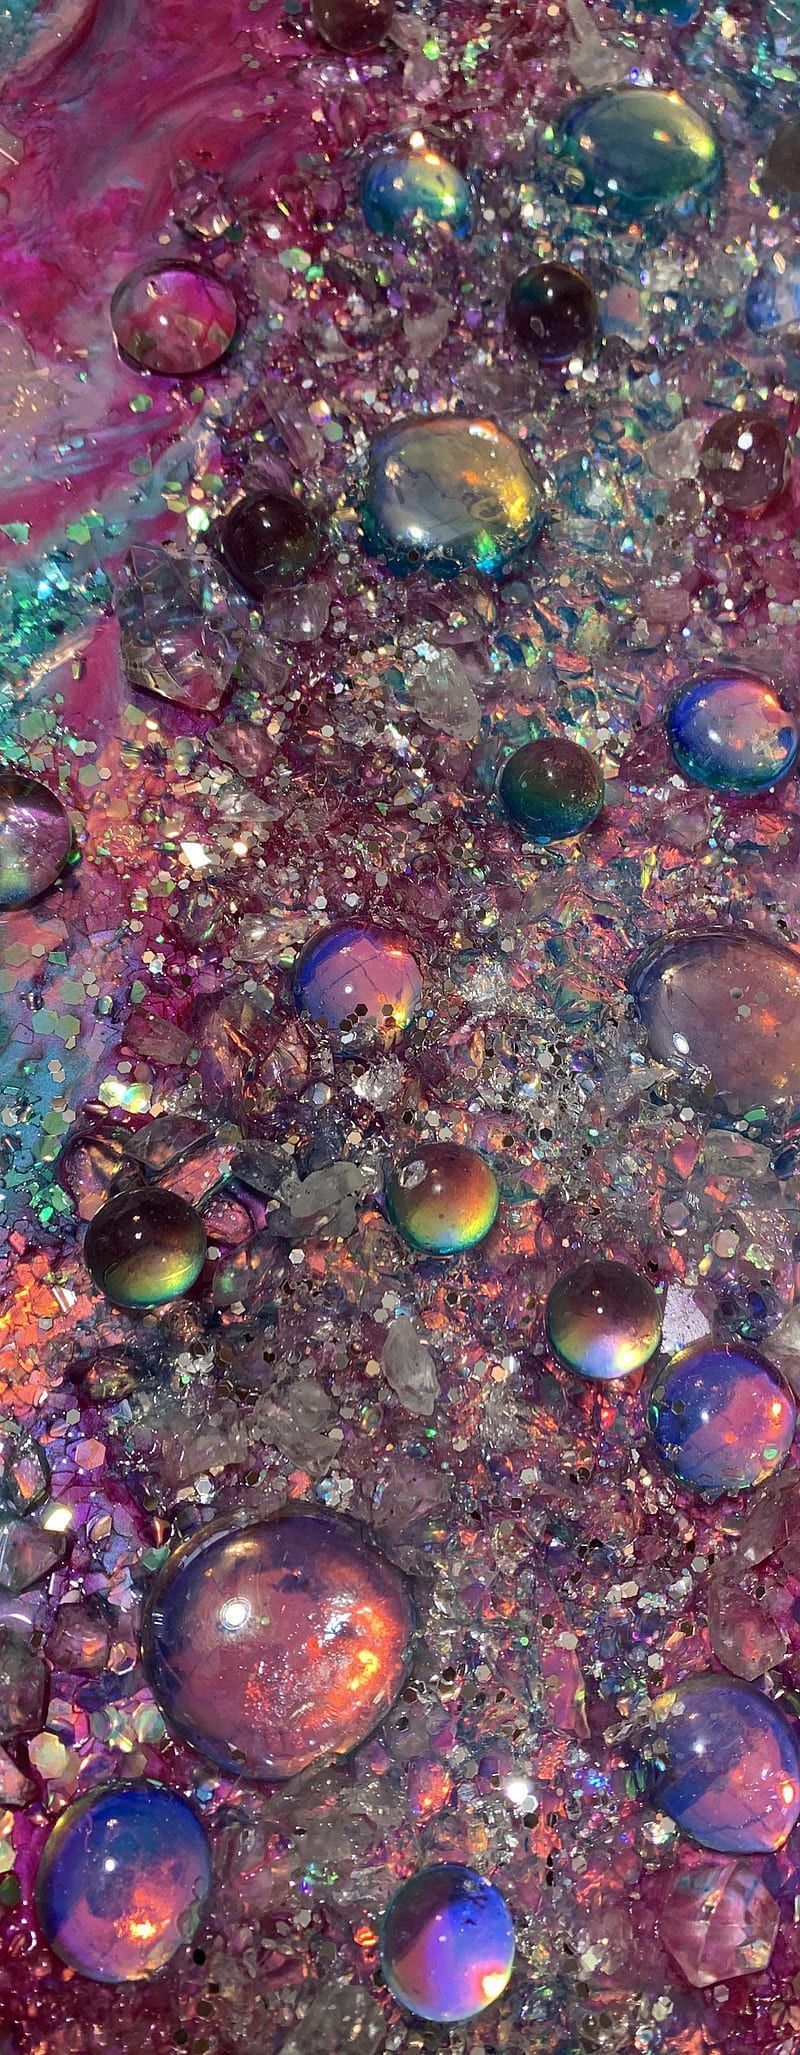 A close up of bubbles and glitter on a dark background. - Bubbles, iridescent